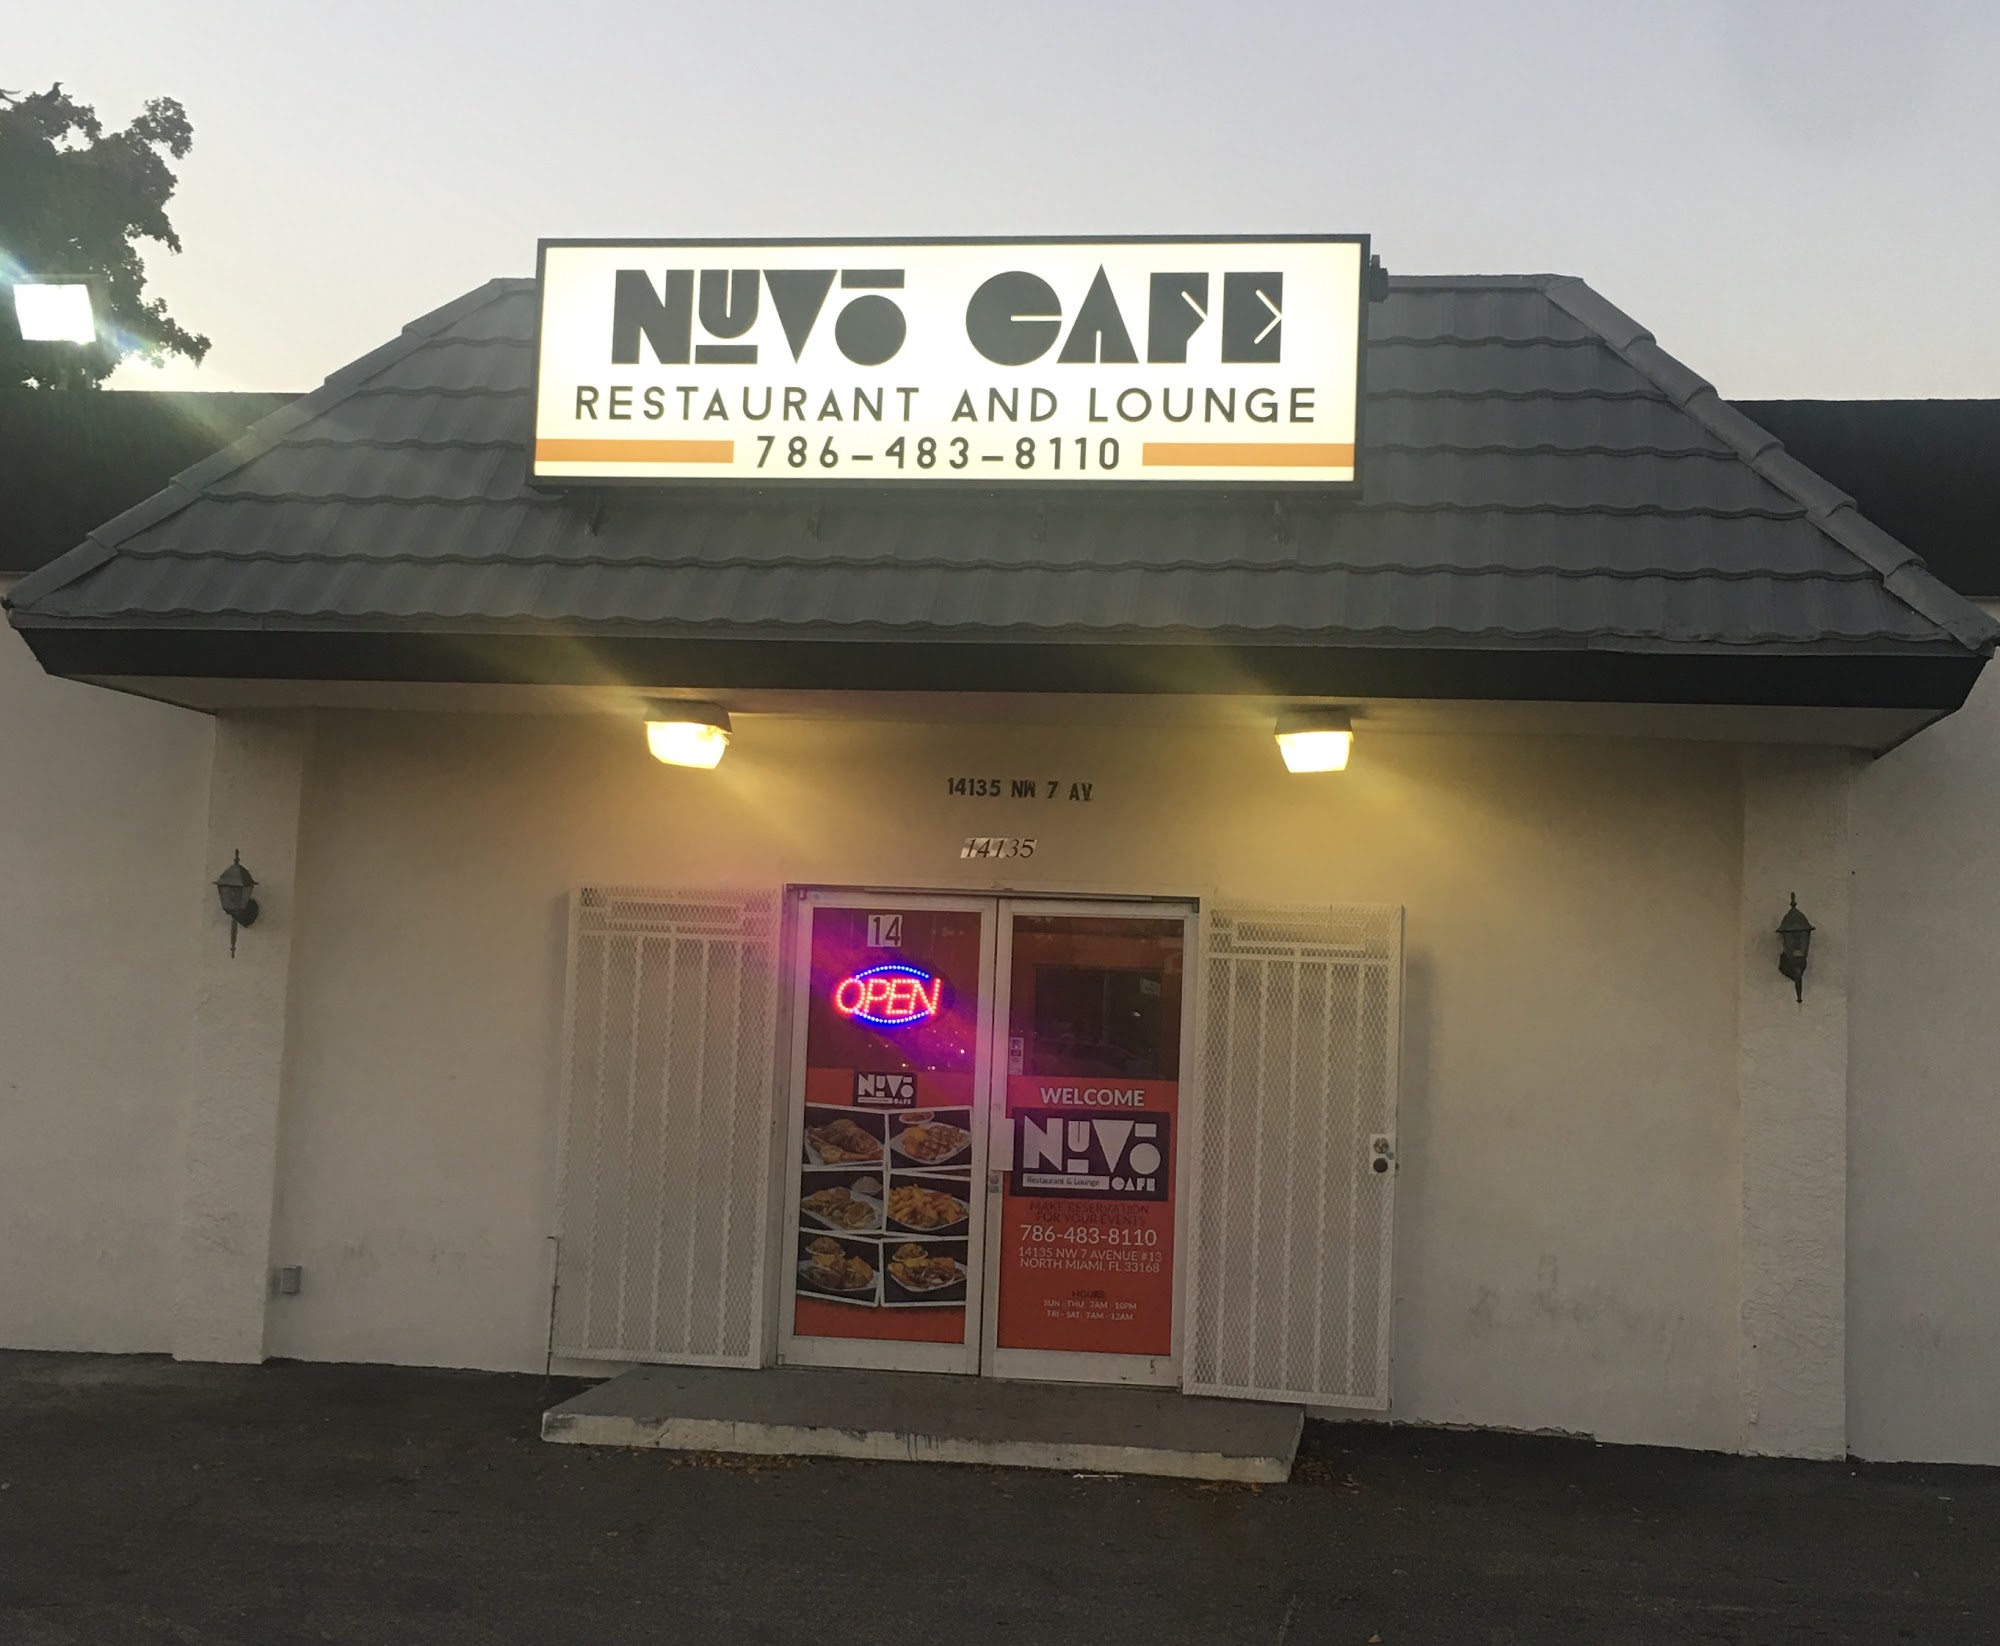 Nuvo Cafe Restaurant & Lounge